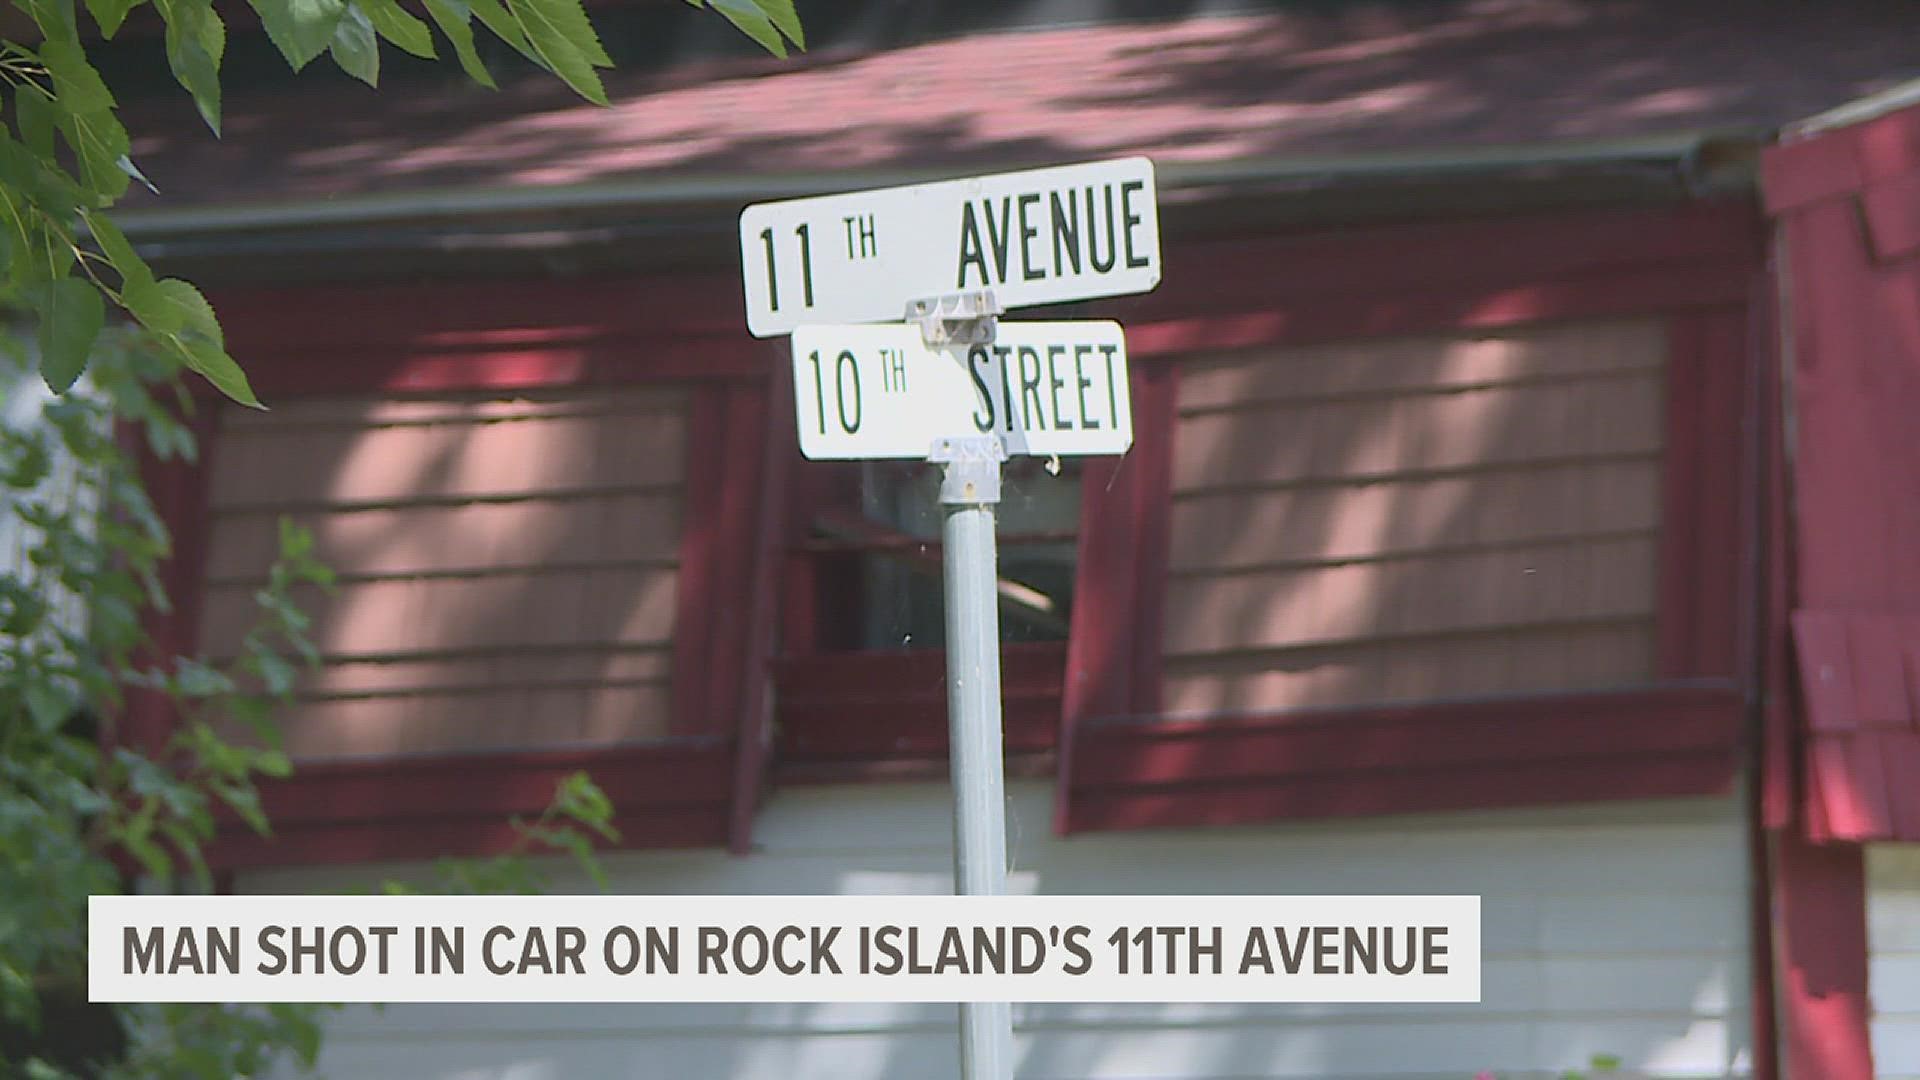 The separate incidents on 11th Avenue and 8th Street left two men with serious gunshot wounds.